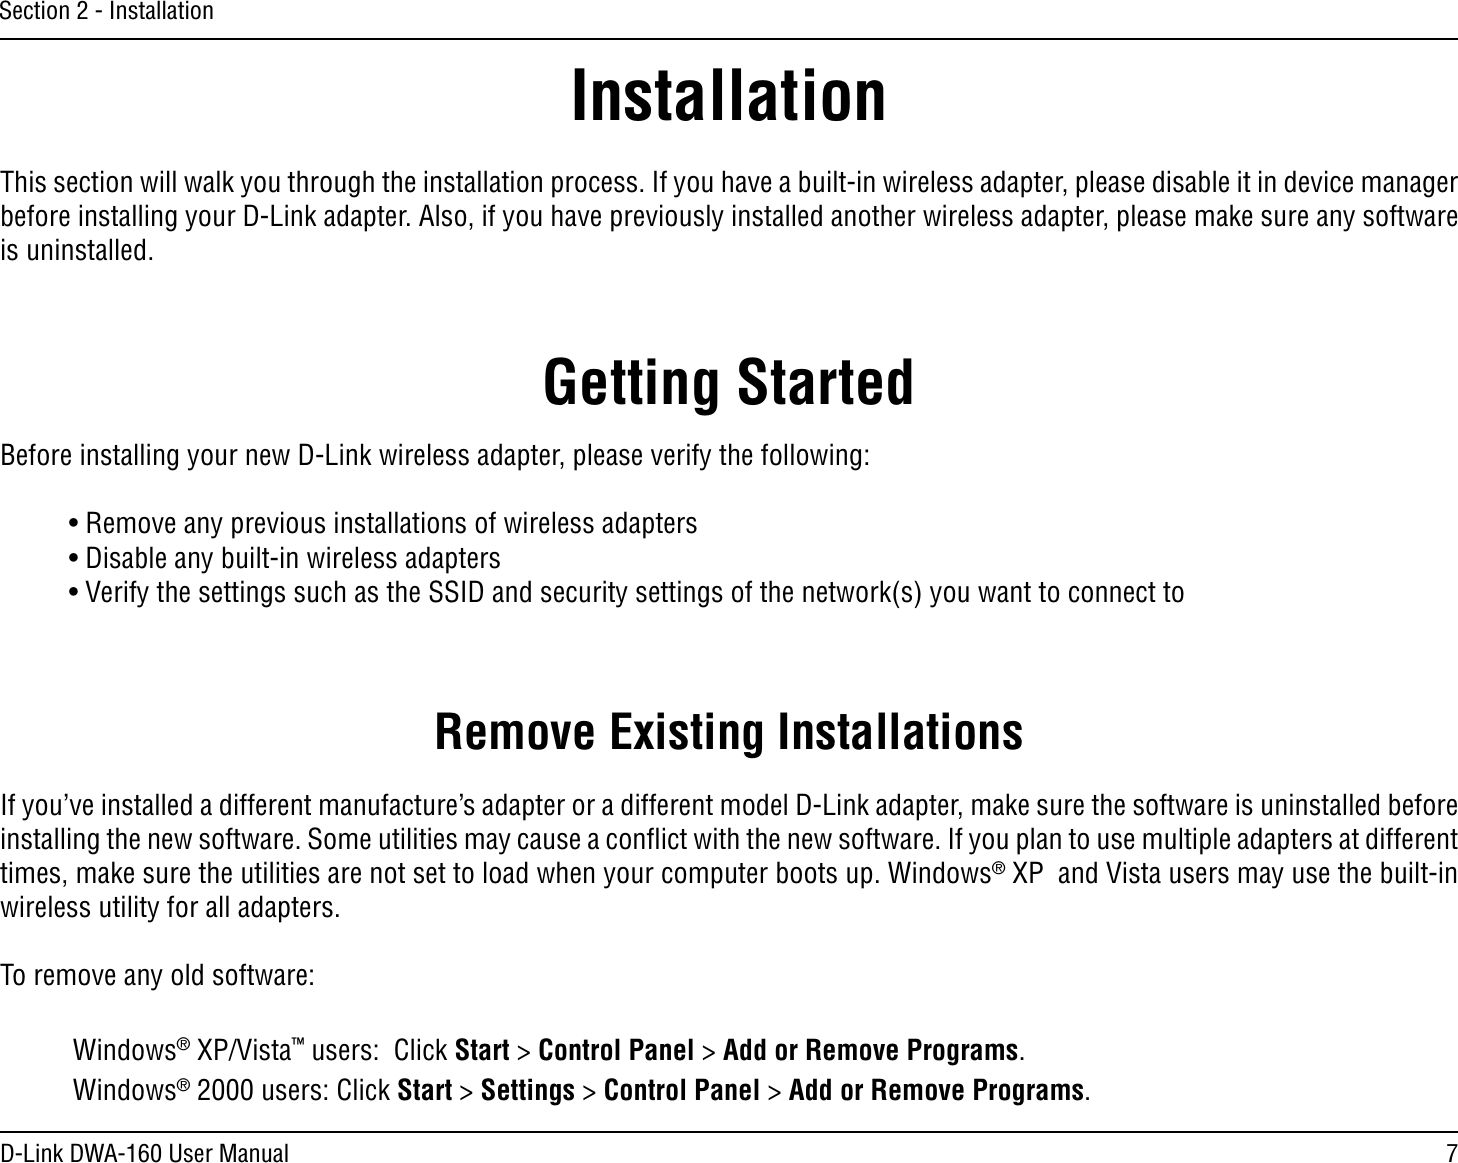 7D-Link DWA-160 User ManualSection 2 - InstallationGetting StartedInstallationThis section will walk you through the installation process. If you have a built-in wireless adapter, please disable it in device manager before installing your D-Link adapter. Also, if you have previously installed another wireless adapter, please make sure any software is uninstalled.Before installing your new D-Link wireless adapter, please verify the following:s2EMOVEANYPREVIOUSINSTALLATIONSOFWIRELESSADAPTERSs$ISABLEANYBUILTINWIRELESSADAPTERSs6ERIFYTHESETTINGSSUCHASTHE33)$ANDSECURITYSETTINGSOFTHENETWORKSYOUWANTTOCONNECTTORemove Existing Installations)FYOUVEINSTALLEDADIFFERENTMANUFACTURESADAPTERORADIFFERENTMODEL$,INKADAPTERMAKESURETHESOFTWAREISUNINSTALLEDBEFOREinstalling the new software. Some utilities may cause a conﬂict with the new software. If you plan to use multiple adapters at different times, make sure the utilities are not set to load when your computer boots up. Windows® XP  and Vista users may use the built-in wireless utility for all adapters.To remove any old software: Windows® XP/Vista™ users:  Click Start &gt; Control Panel &gt; Add or Remove Programs.  Windows® 2000 users: Click Start &gt; Settings &gt; Control Panel &gt; Add or Remove Programs.